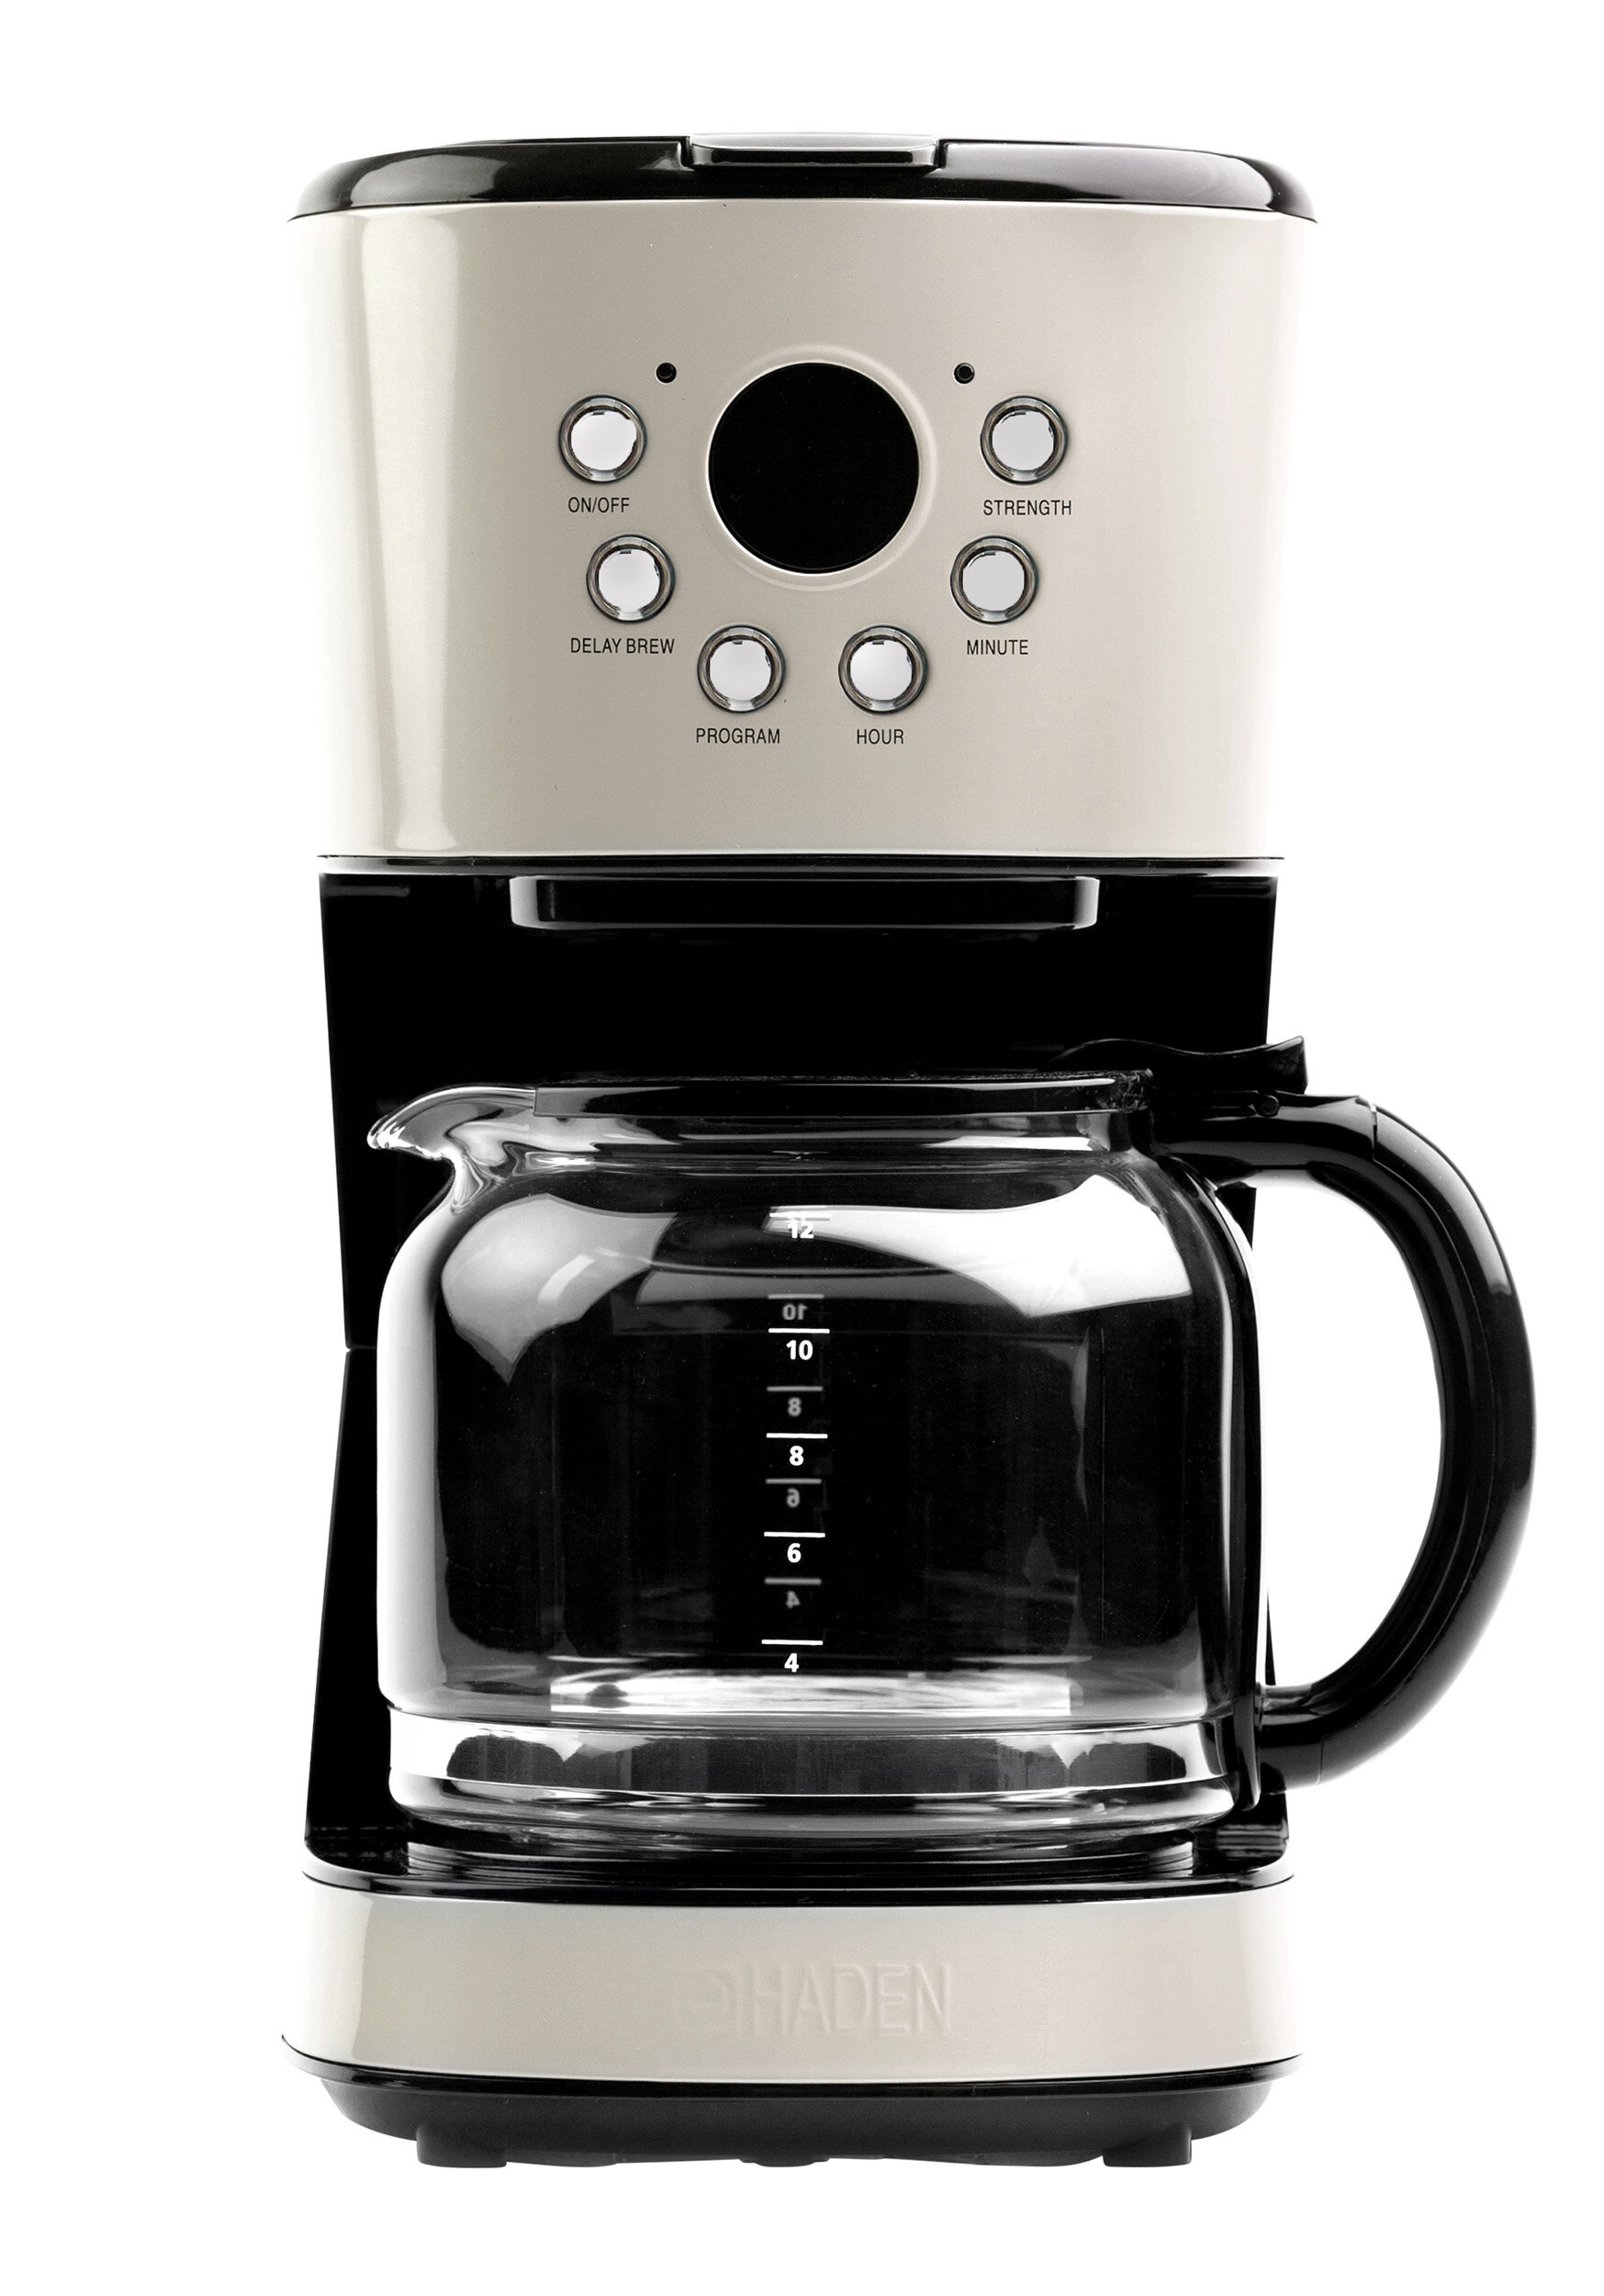 Mr. Coffee 12-Cup Programmable Coffee Maker with Rapid Brew System -  Stainless Steel